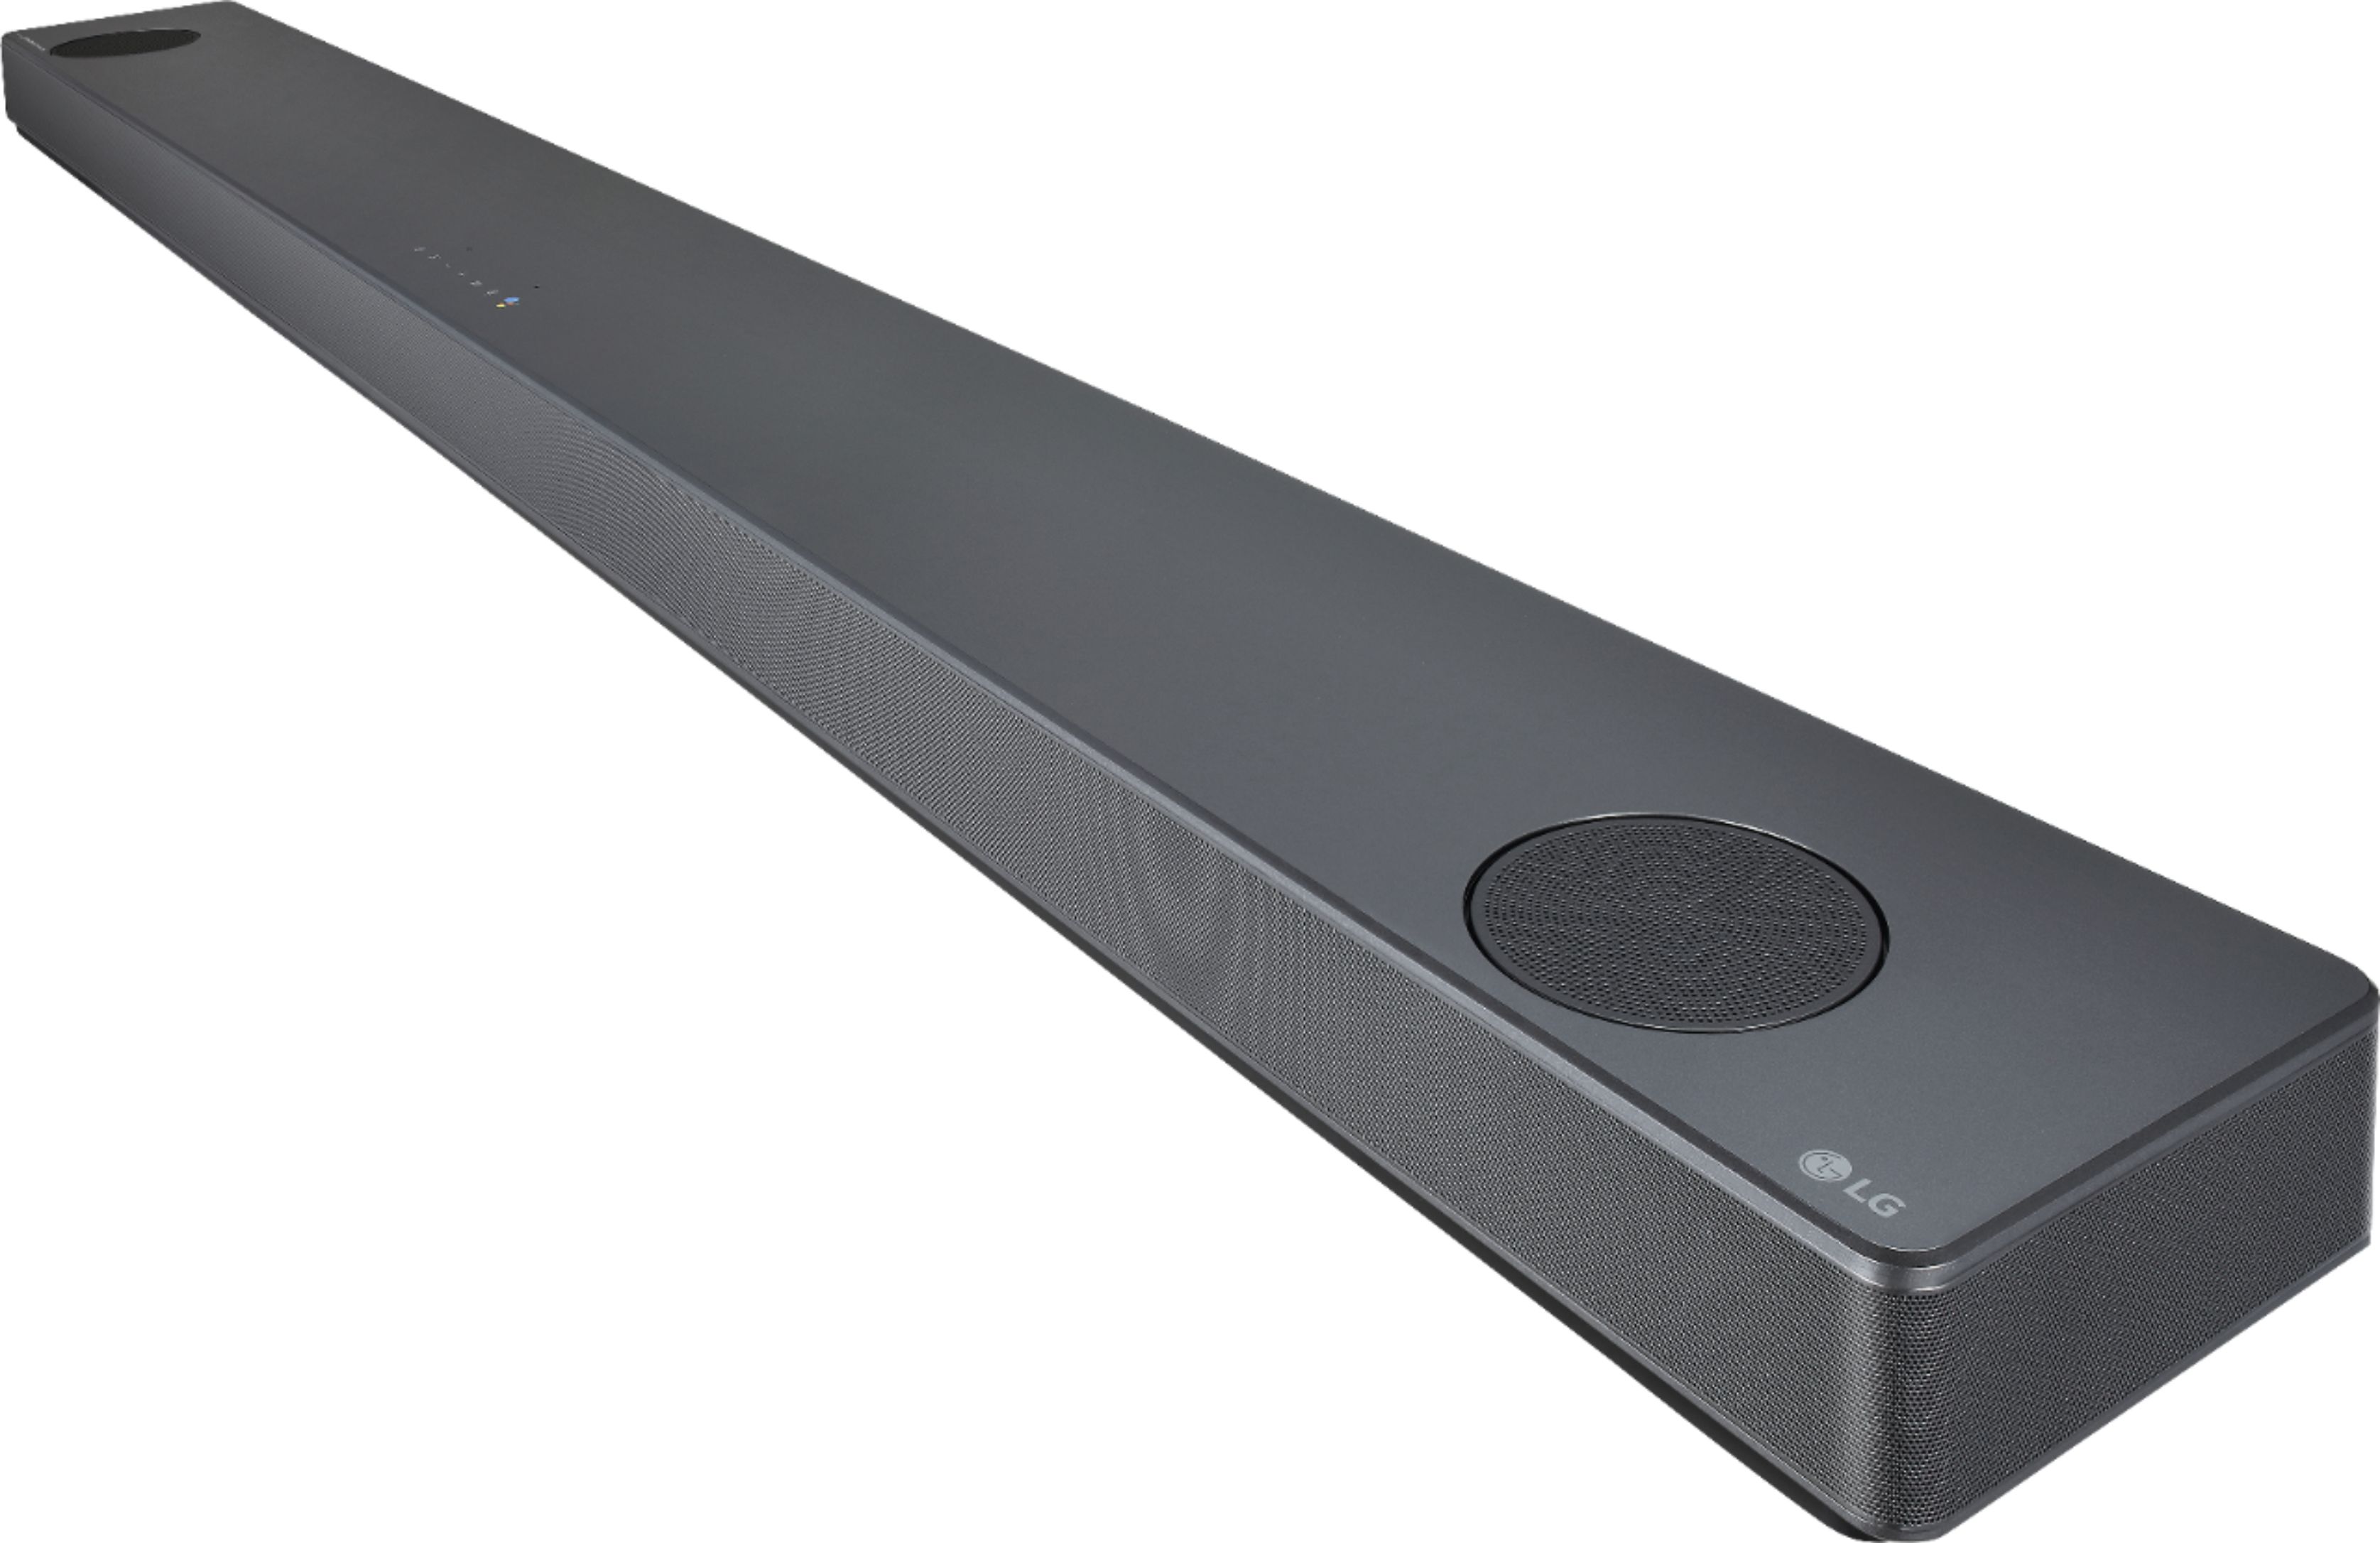 Buy: Subwoofer with SL10RG Black Dolby and Google Atmos 710W Wireless LG Soundbar 7.1.2-Channel Best System Assistant with